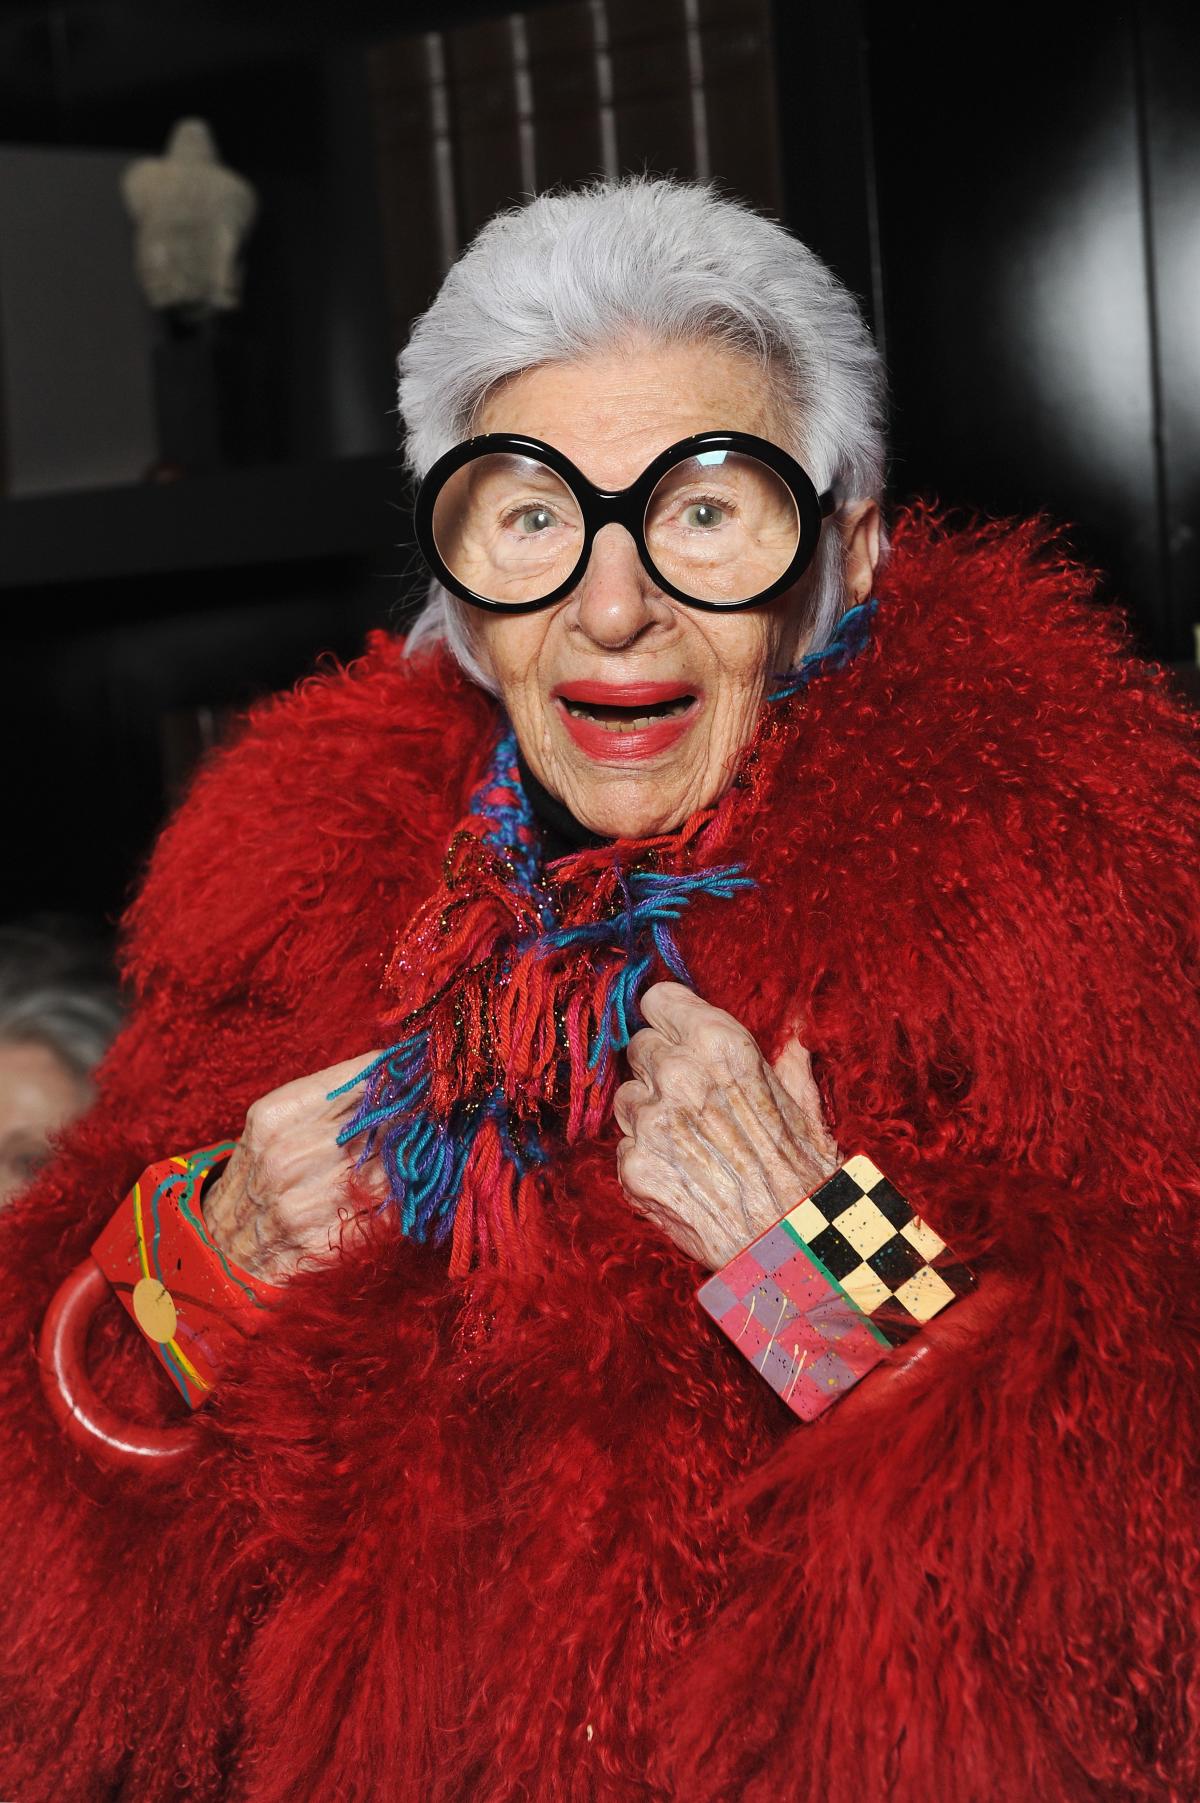 Iris Apfel Interview: On Style and Her Blue Illusion Campaign